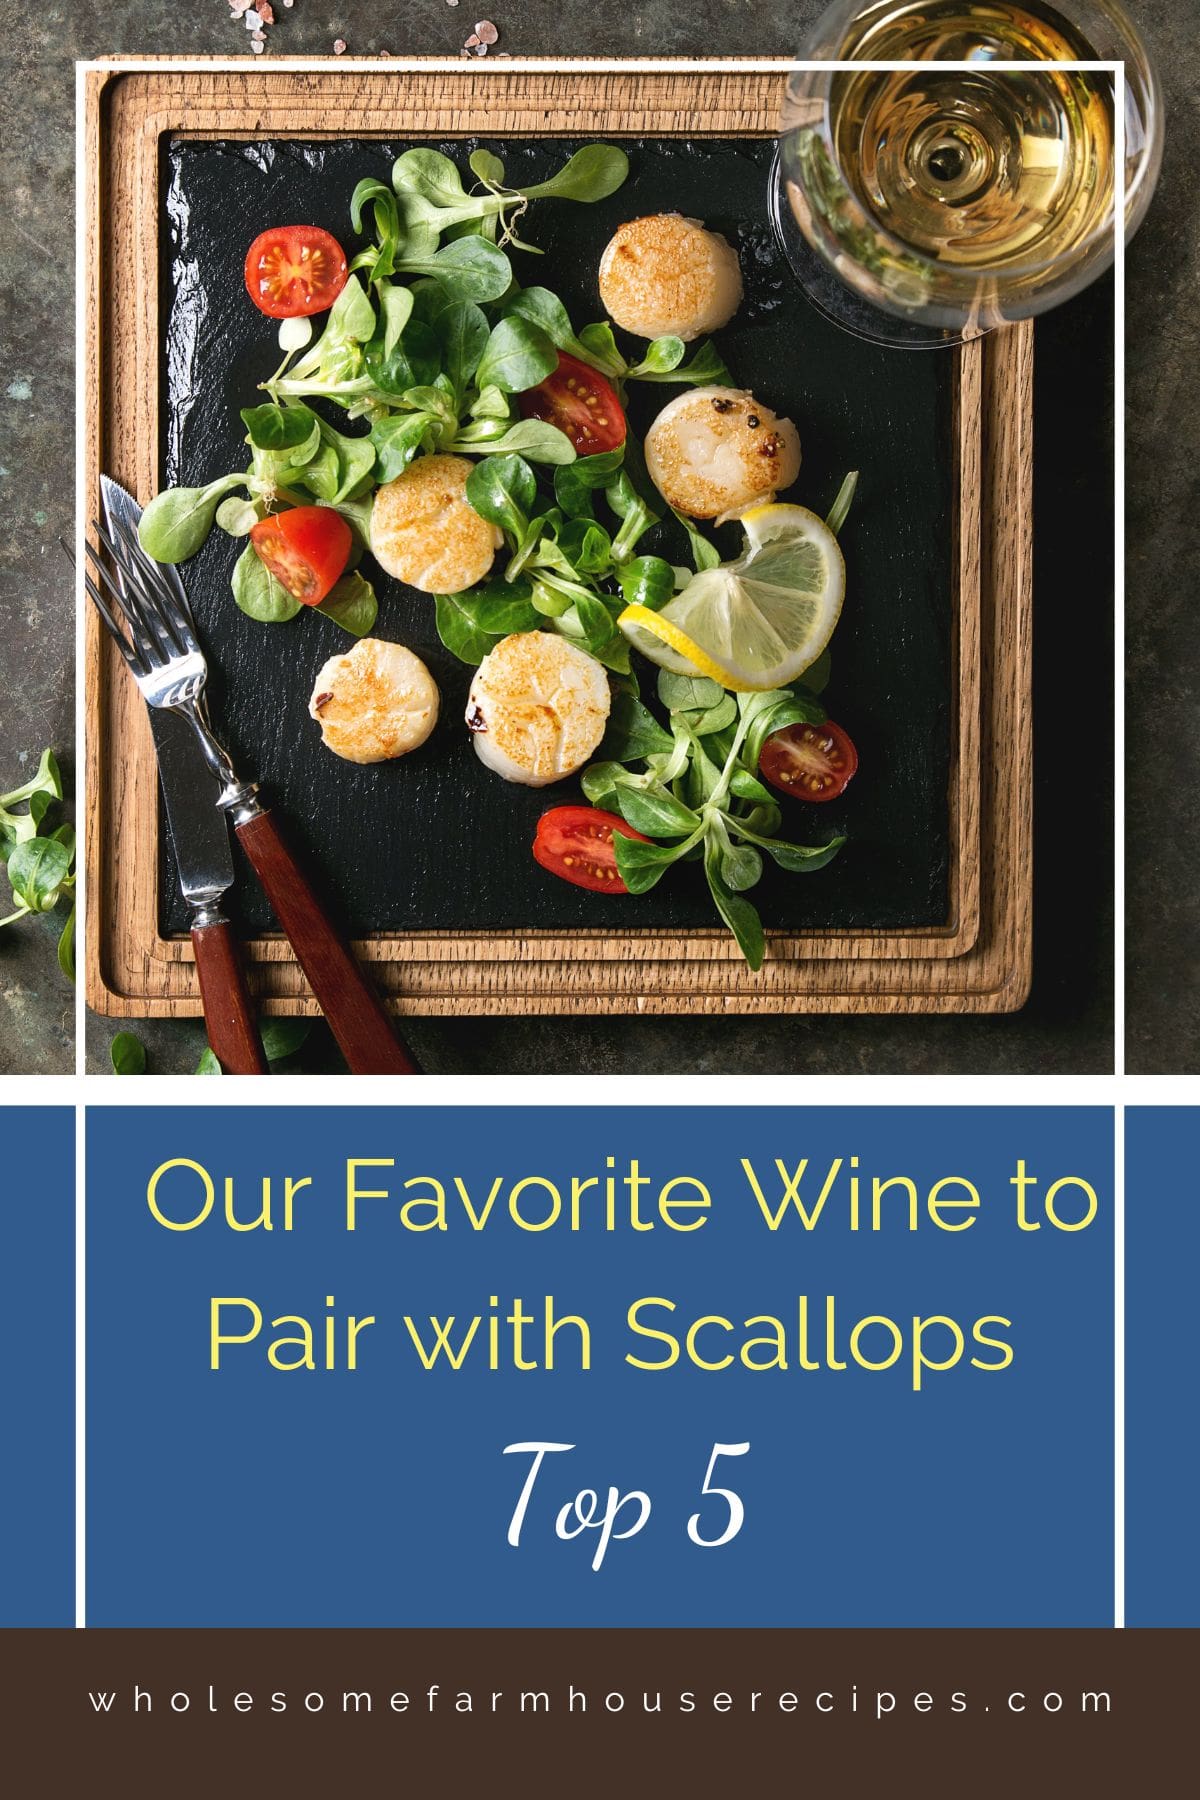 Our Favorite Wine to Pair with Scallops Top 5